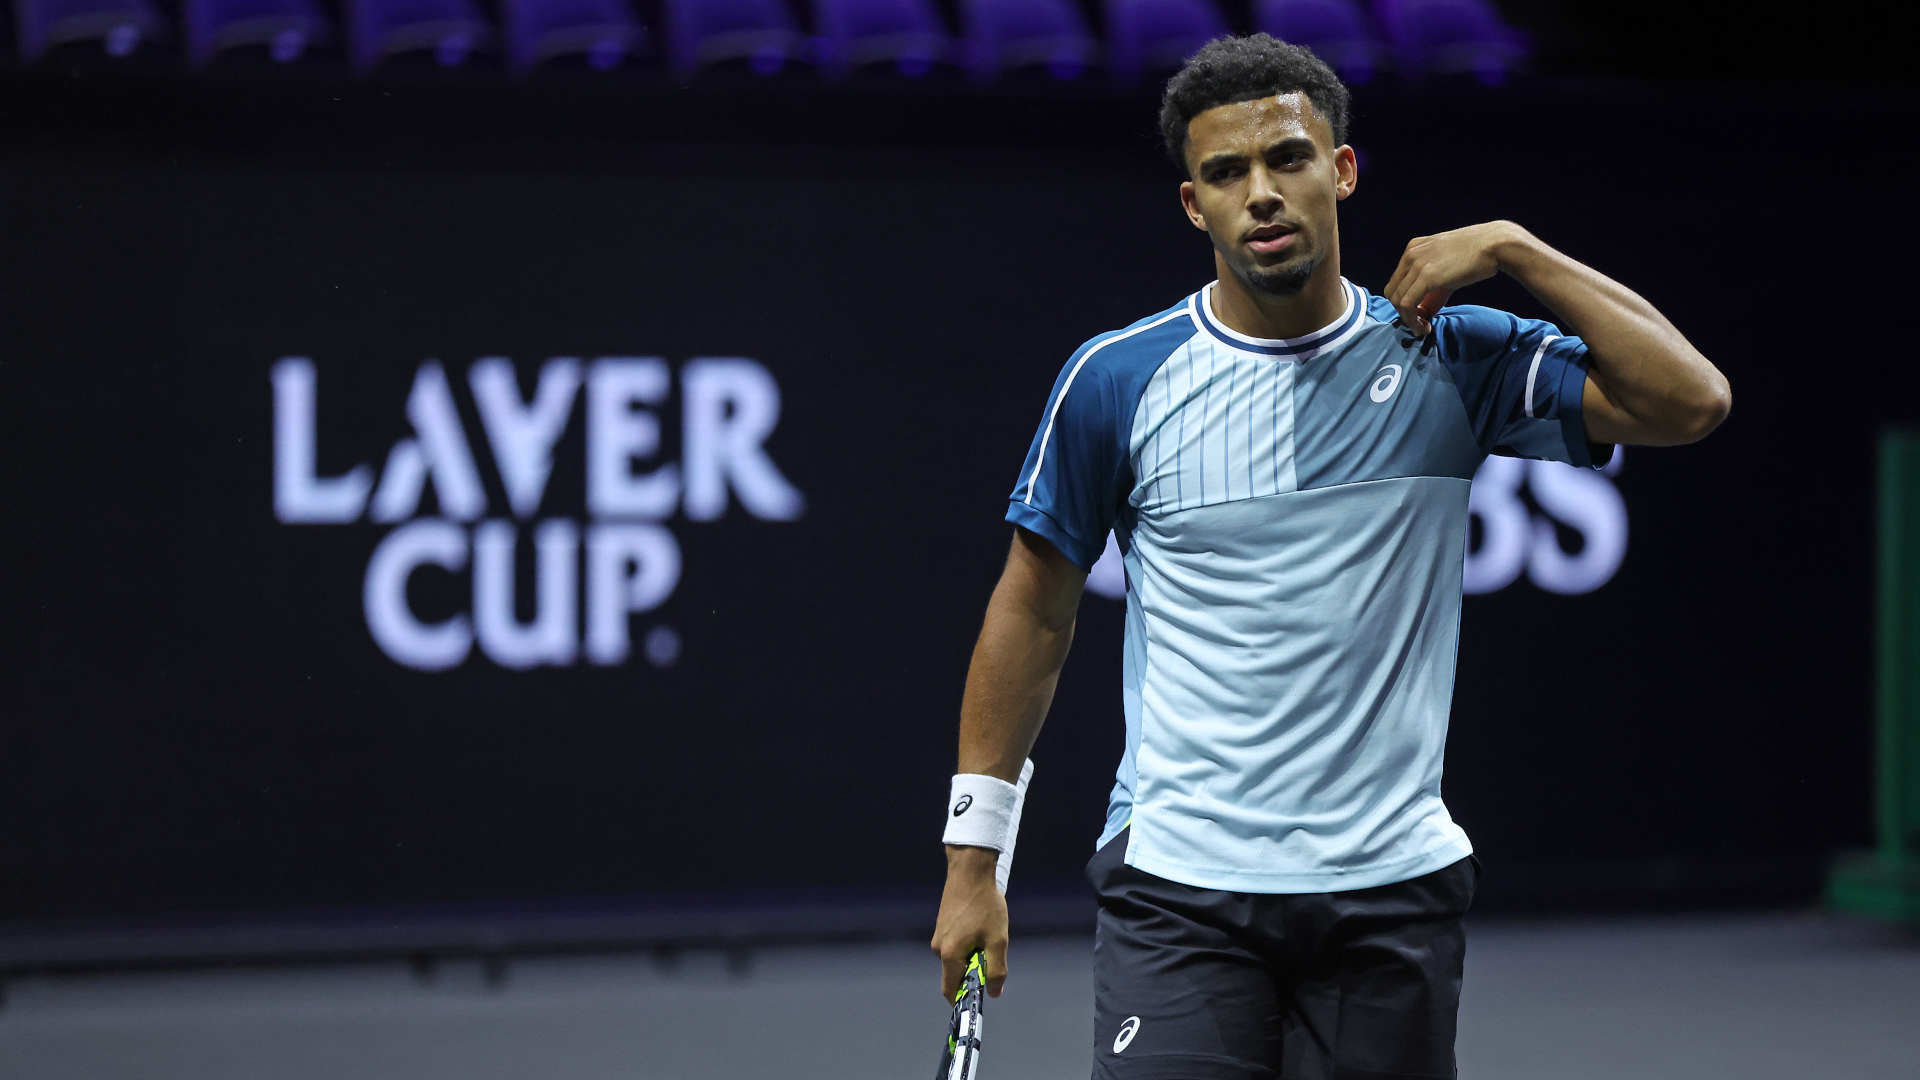 laver cup online free stream